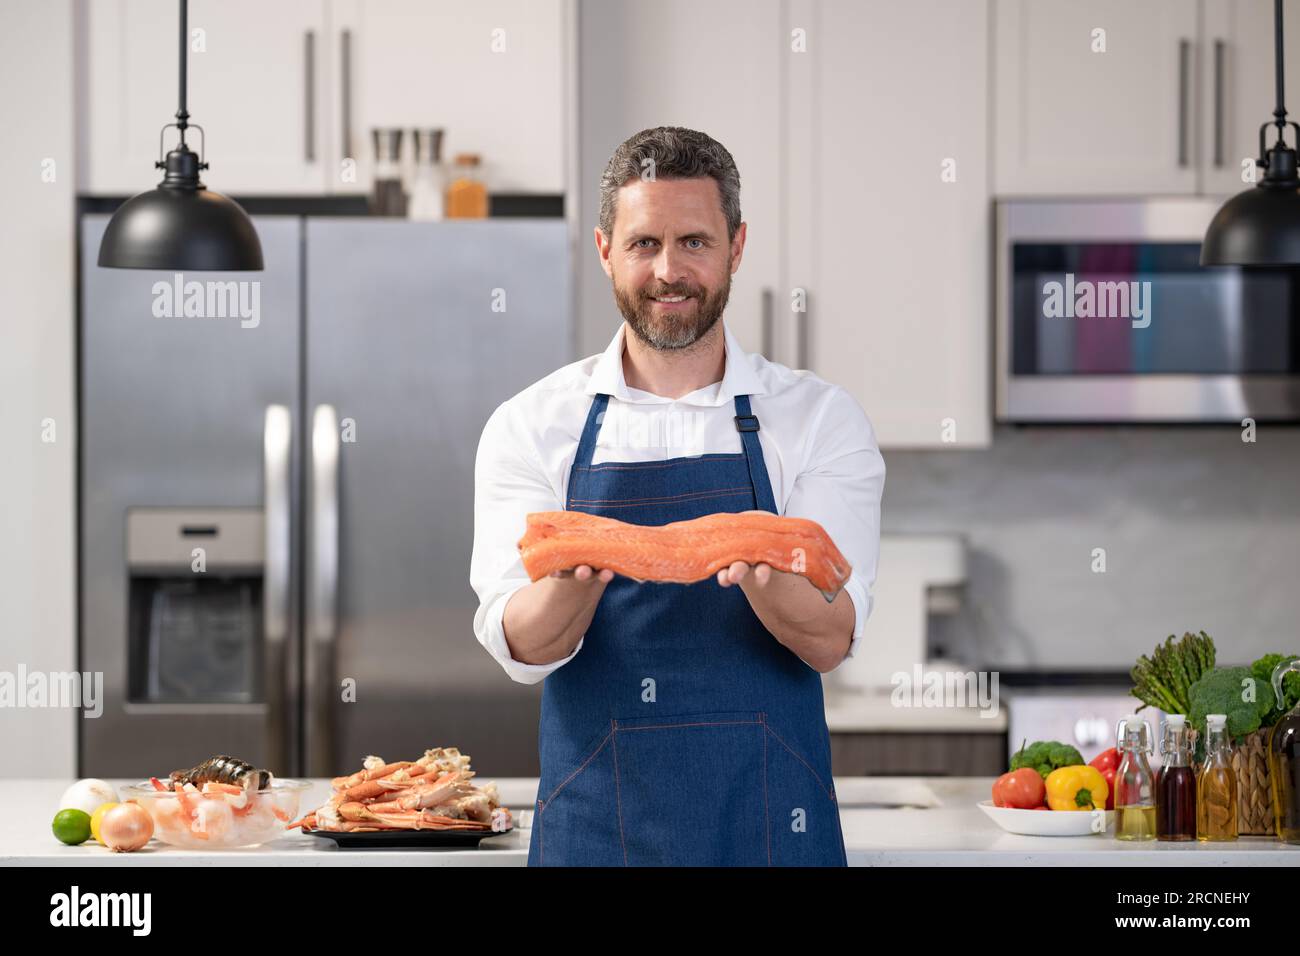 happy chef man cooking fish. chef man cooking fish salmon. chef man cooking fish in the kitchen. photo of chef man cooking fish. Stock Photo